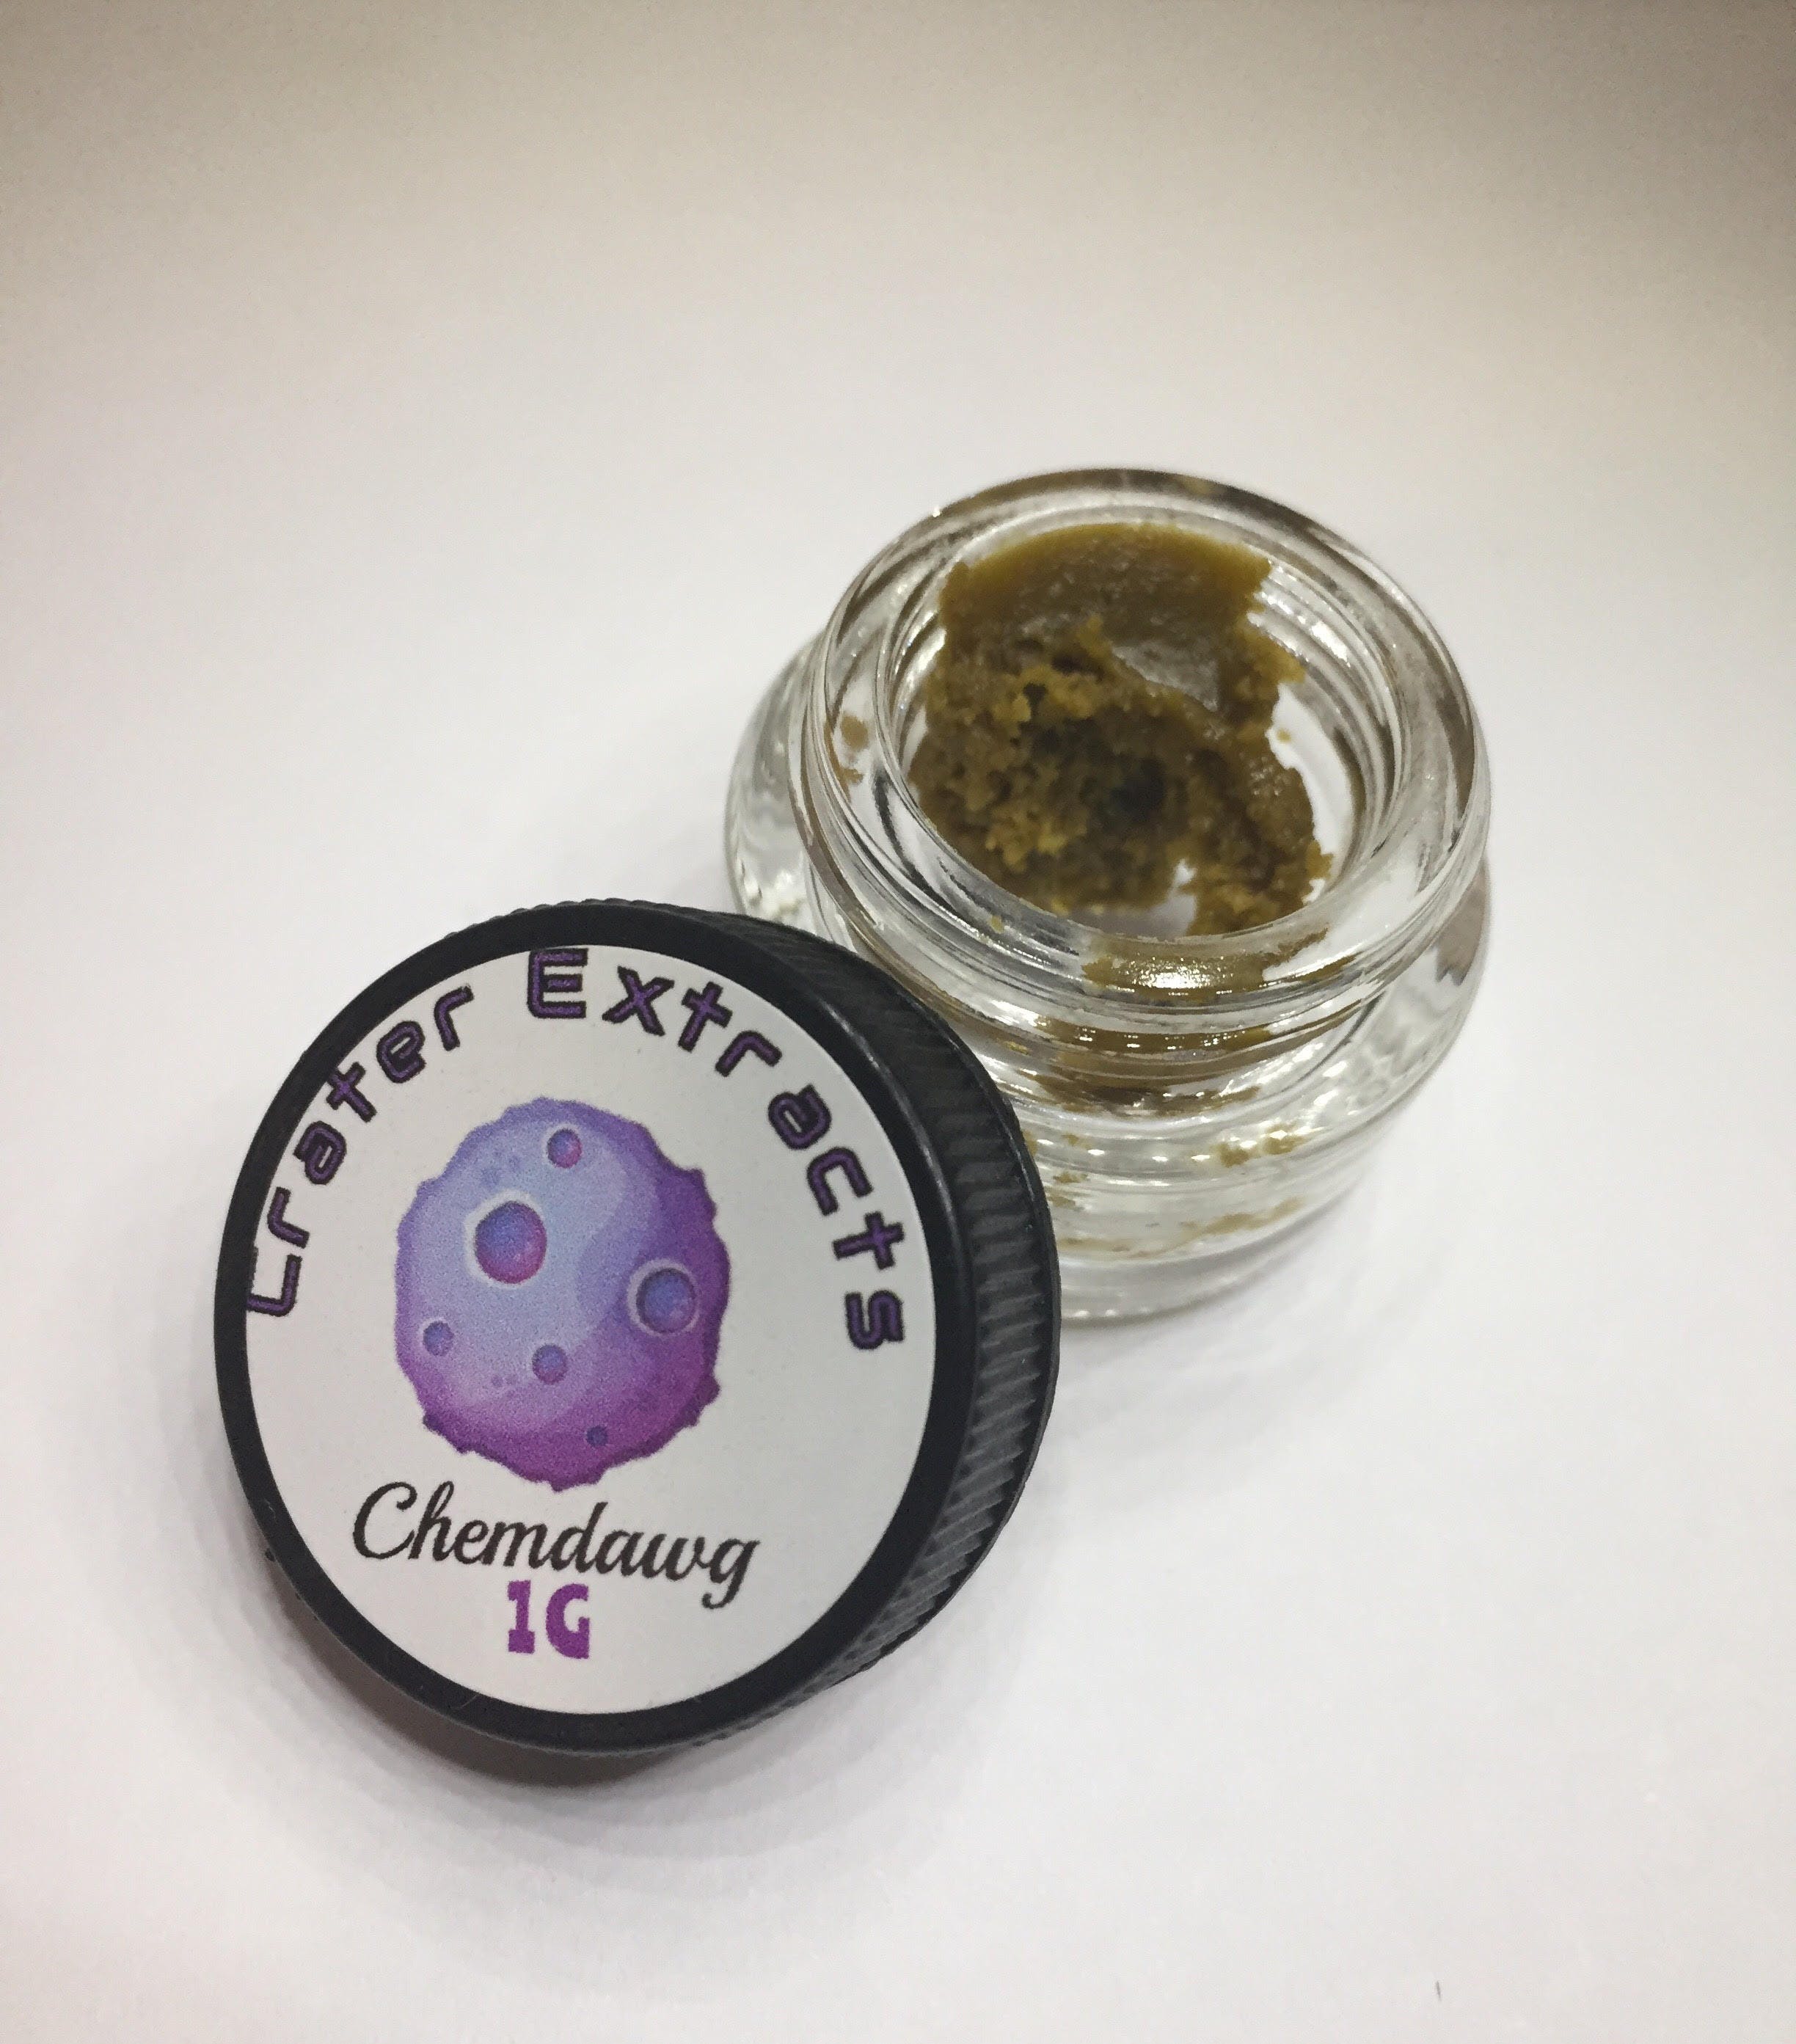 Crater Extracts : Chemdawg